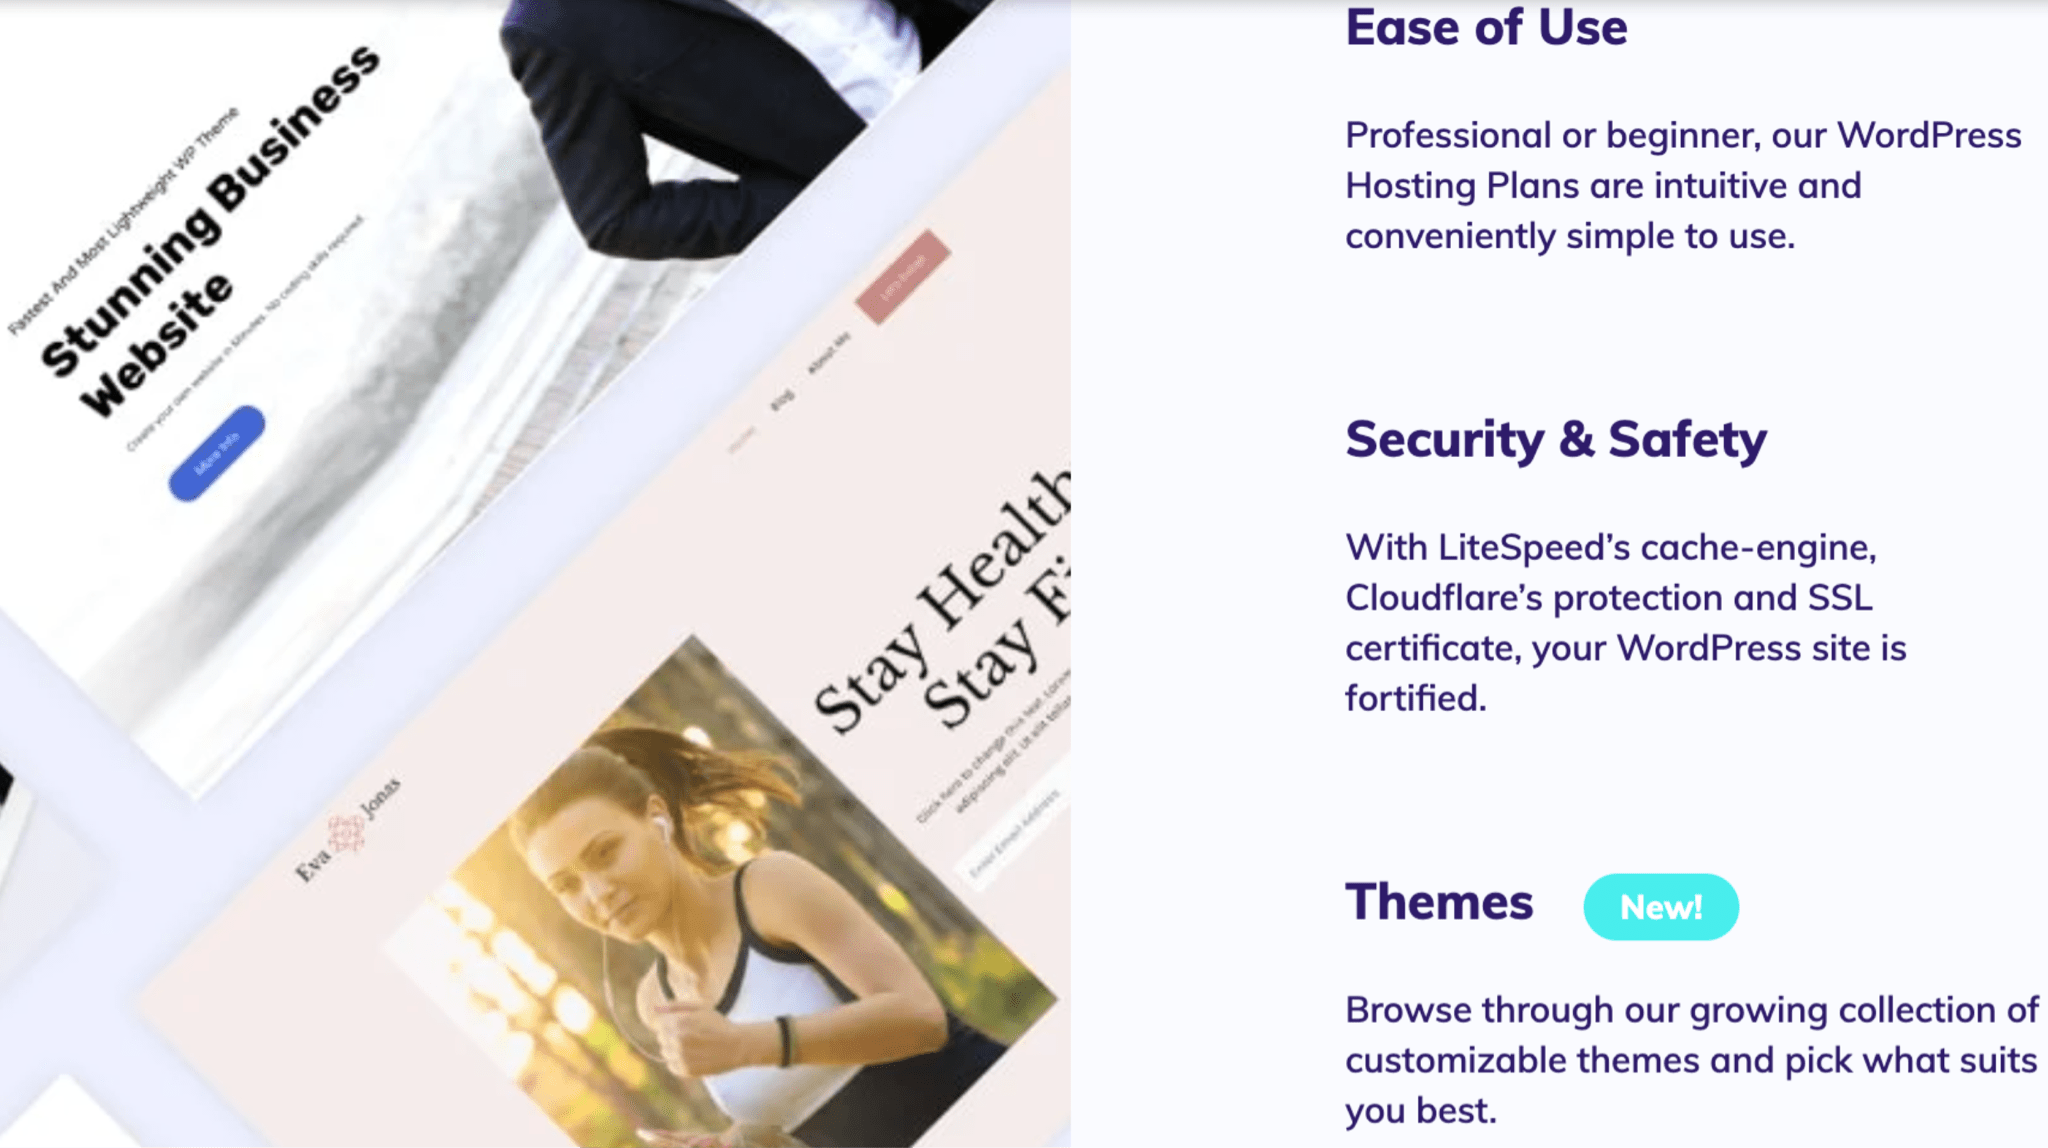 hostinger-wordpress-hosting-ease-of-use-security-and-themes-features